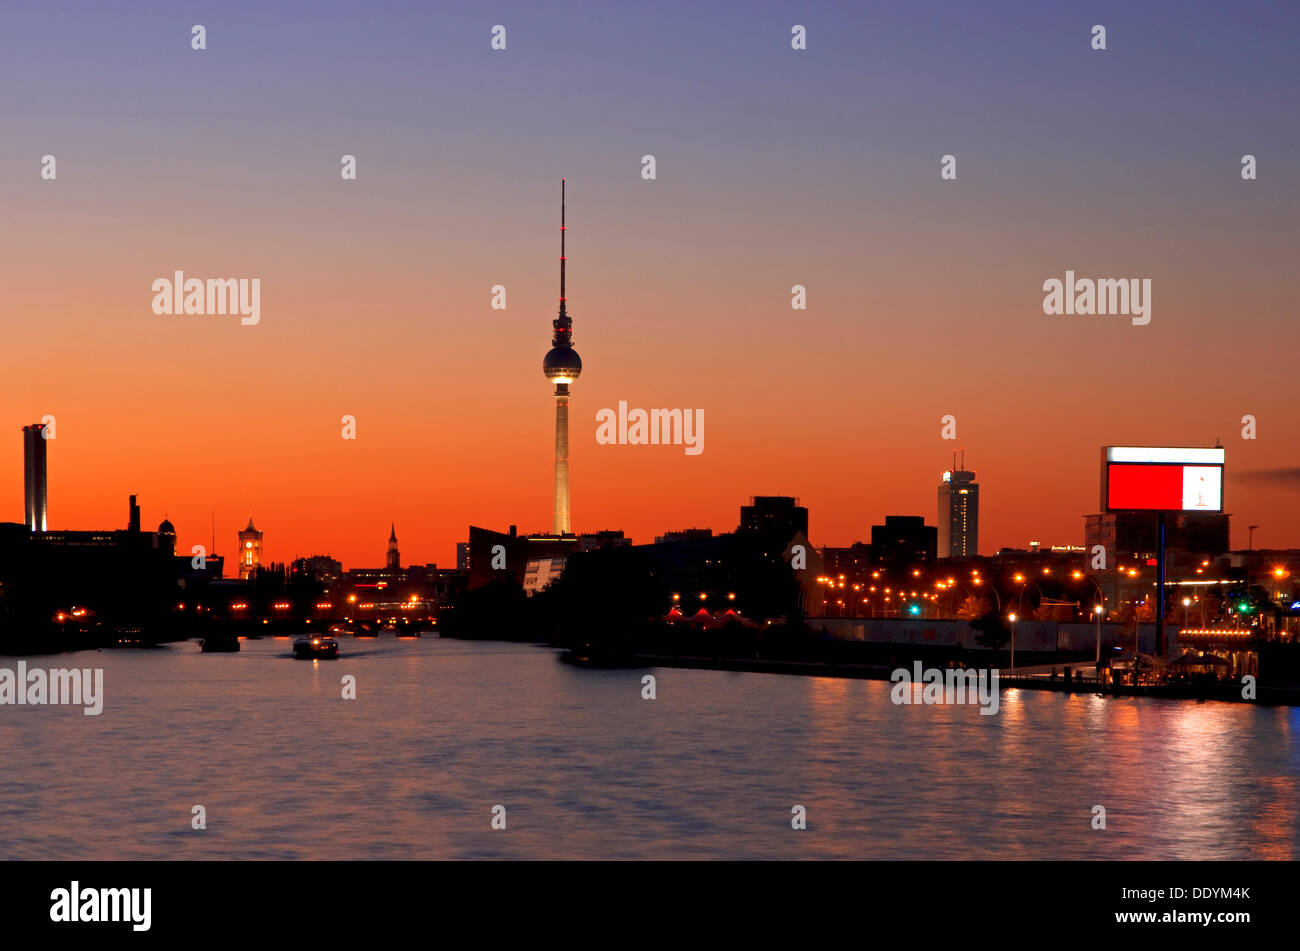 Skyline of Berlin with the Spree River and the Berlin TV tower, at dusk Stock Photo